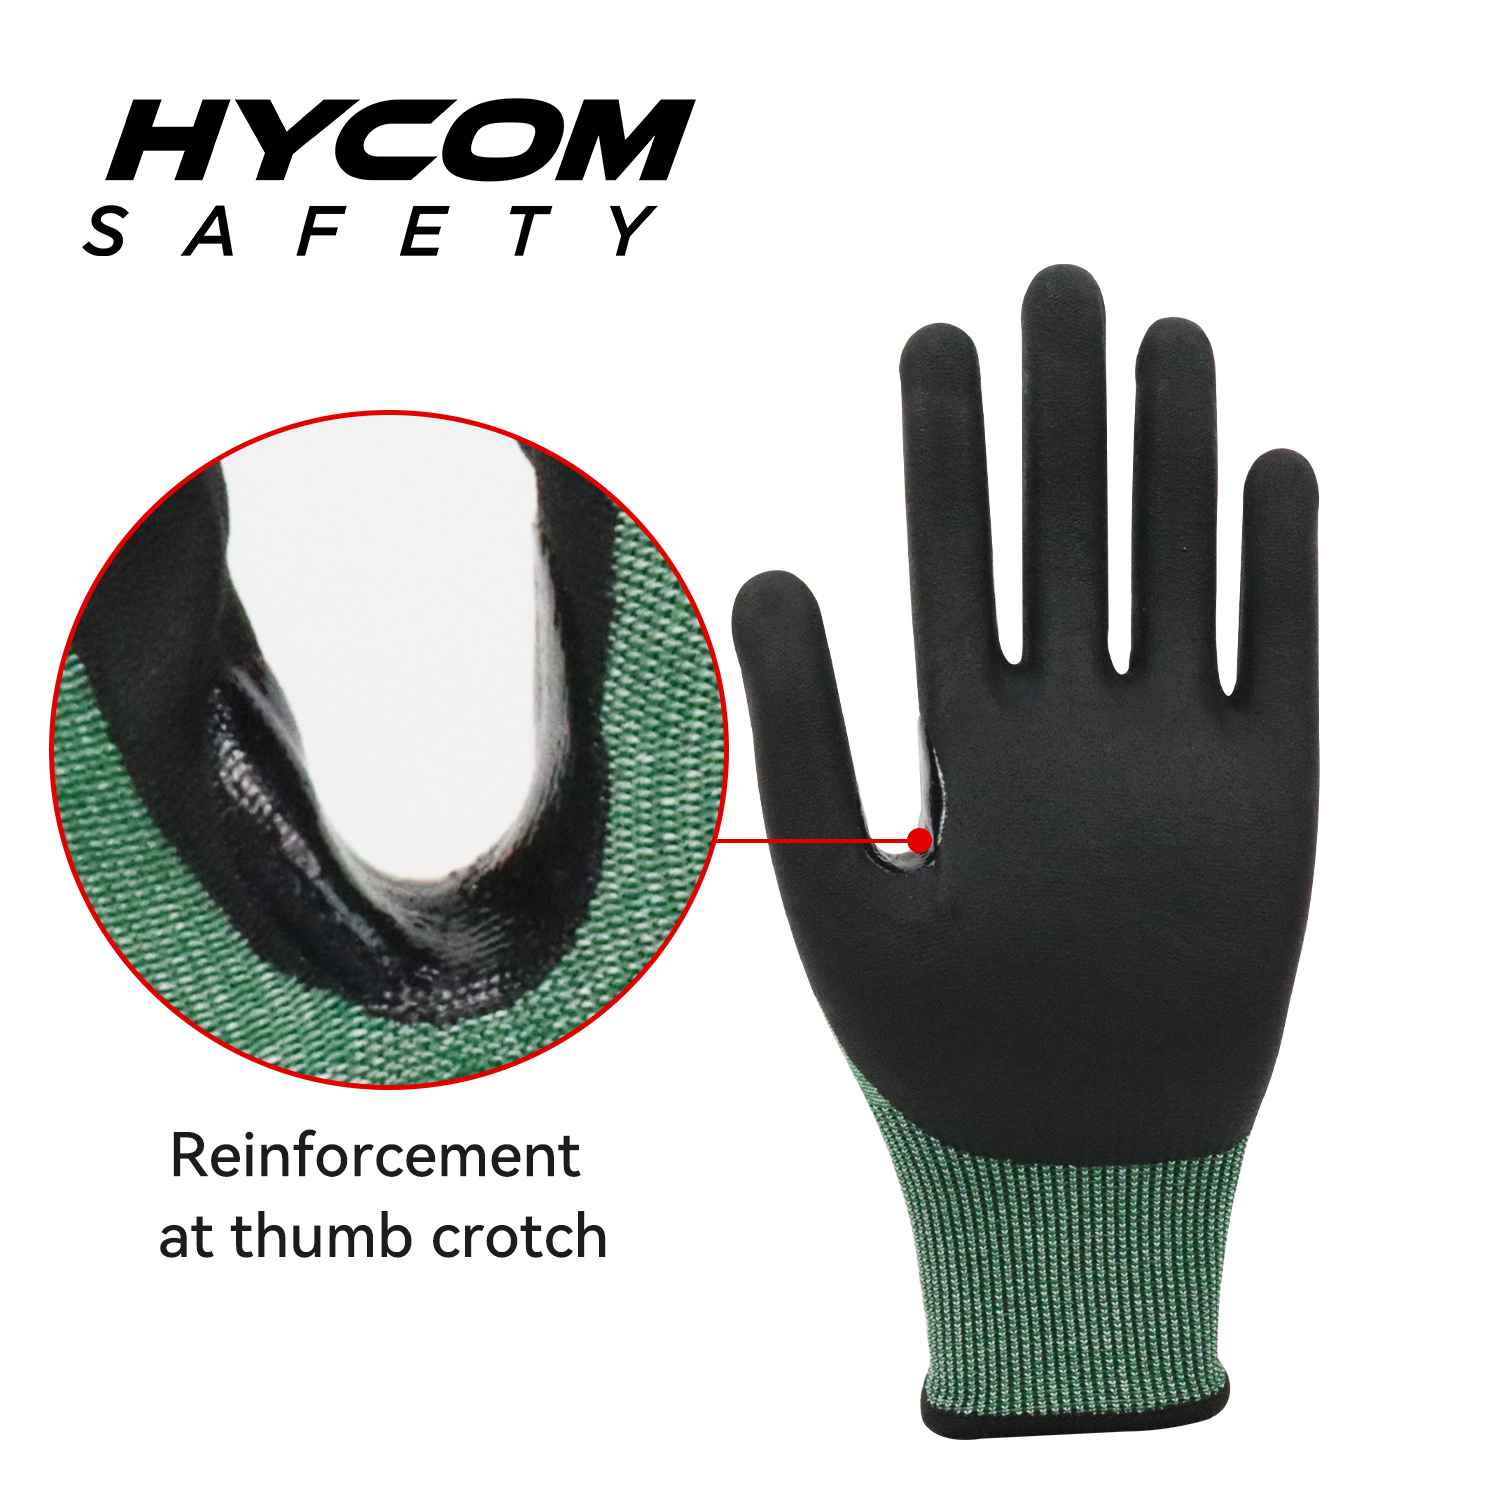 HYCOM 18G ANSI 4 Cut Resistant Glove with Sandy Nitrile Coating Super Thiner Safety Glove